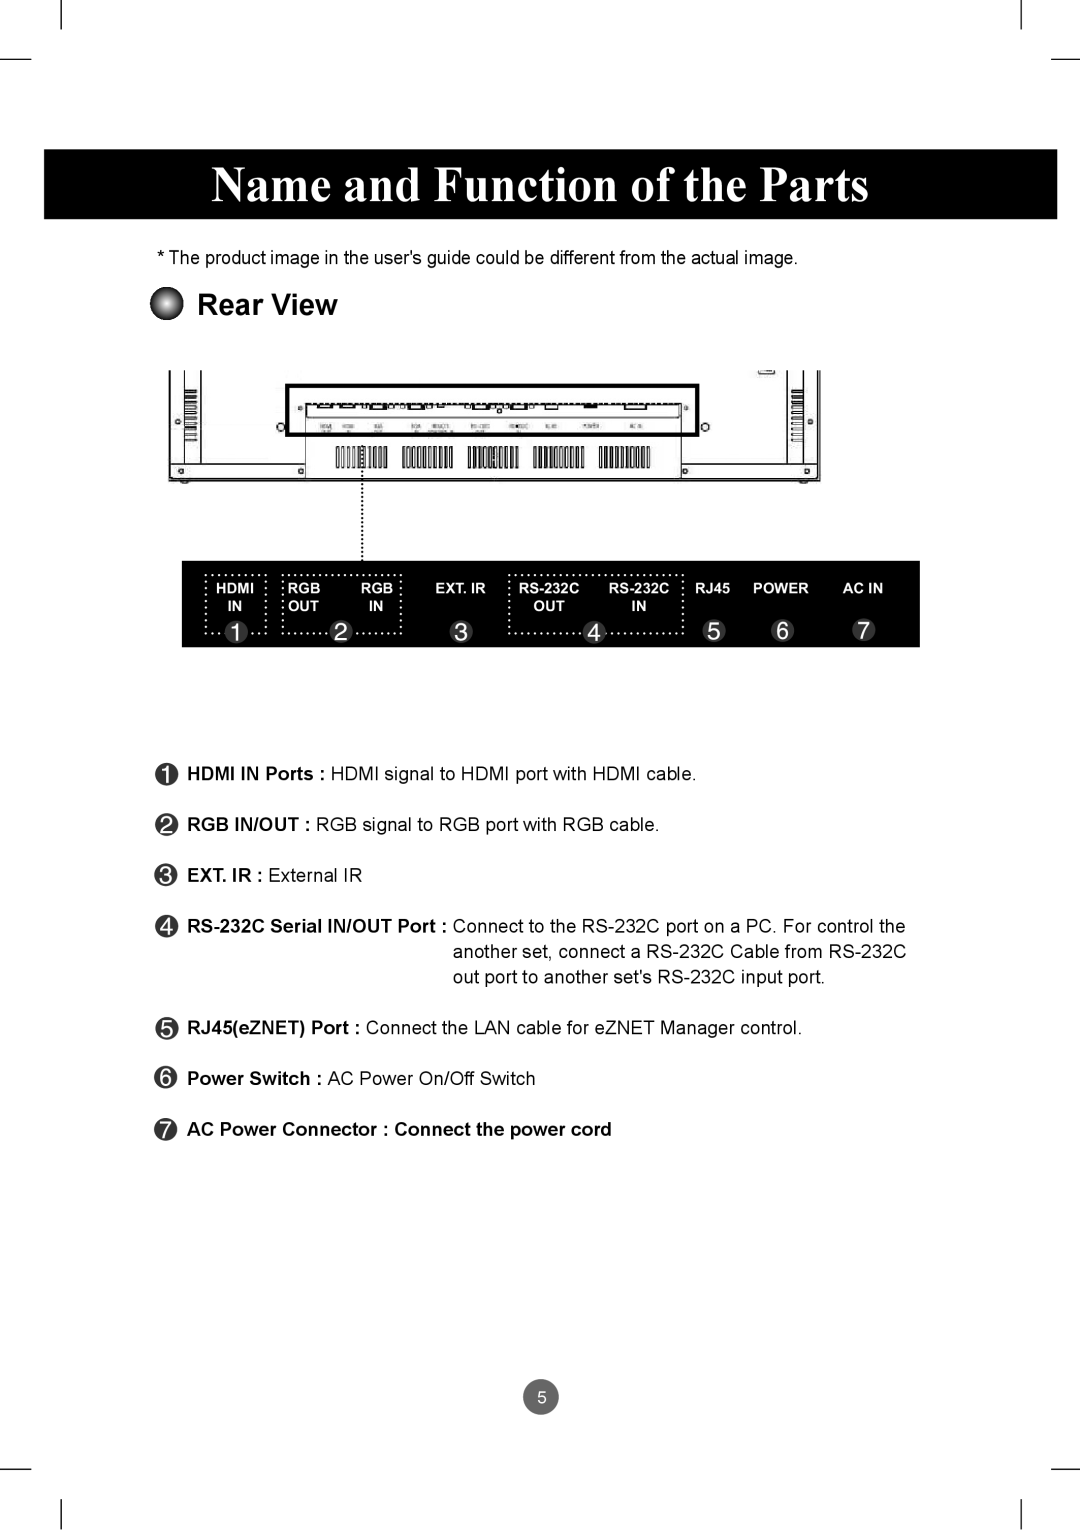 LG Electronics M3801S, M2901S owner manual Name and Function of the Parts, Rear View, EXT. IR External IR 